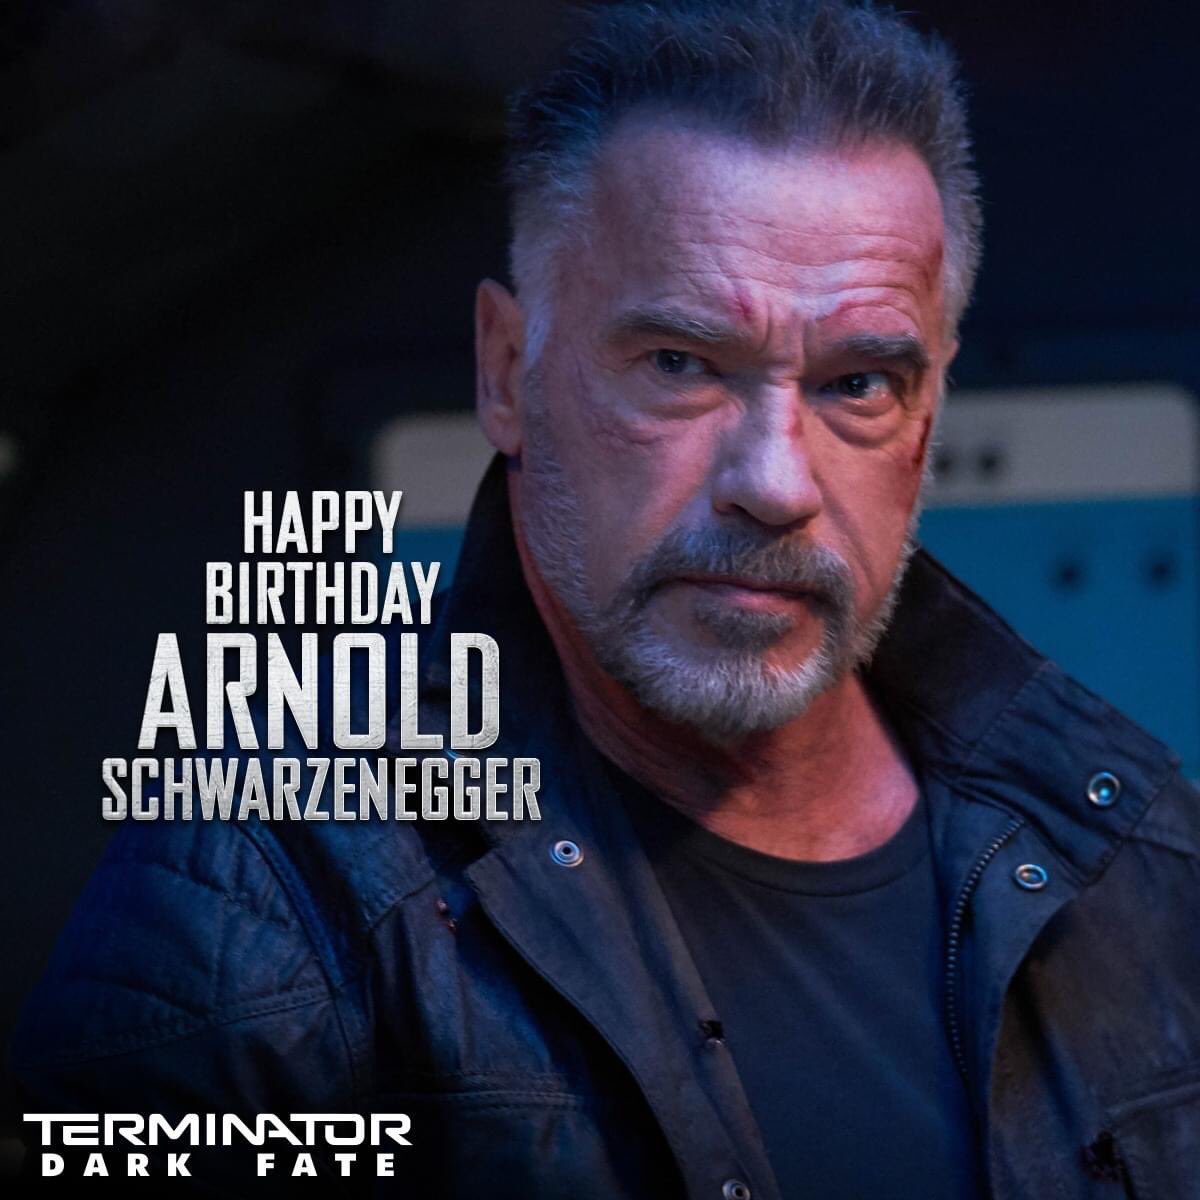 Wishing Arnold a bright future and a Happy Birthday! Once a hunter, now a protector of humanity. Watch Terminator Dark Fate today on Arnold Schwarzenegger’s birthday! paramnt.us/BuyTerminatorDF